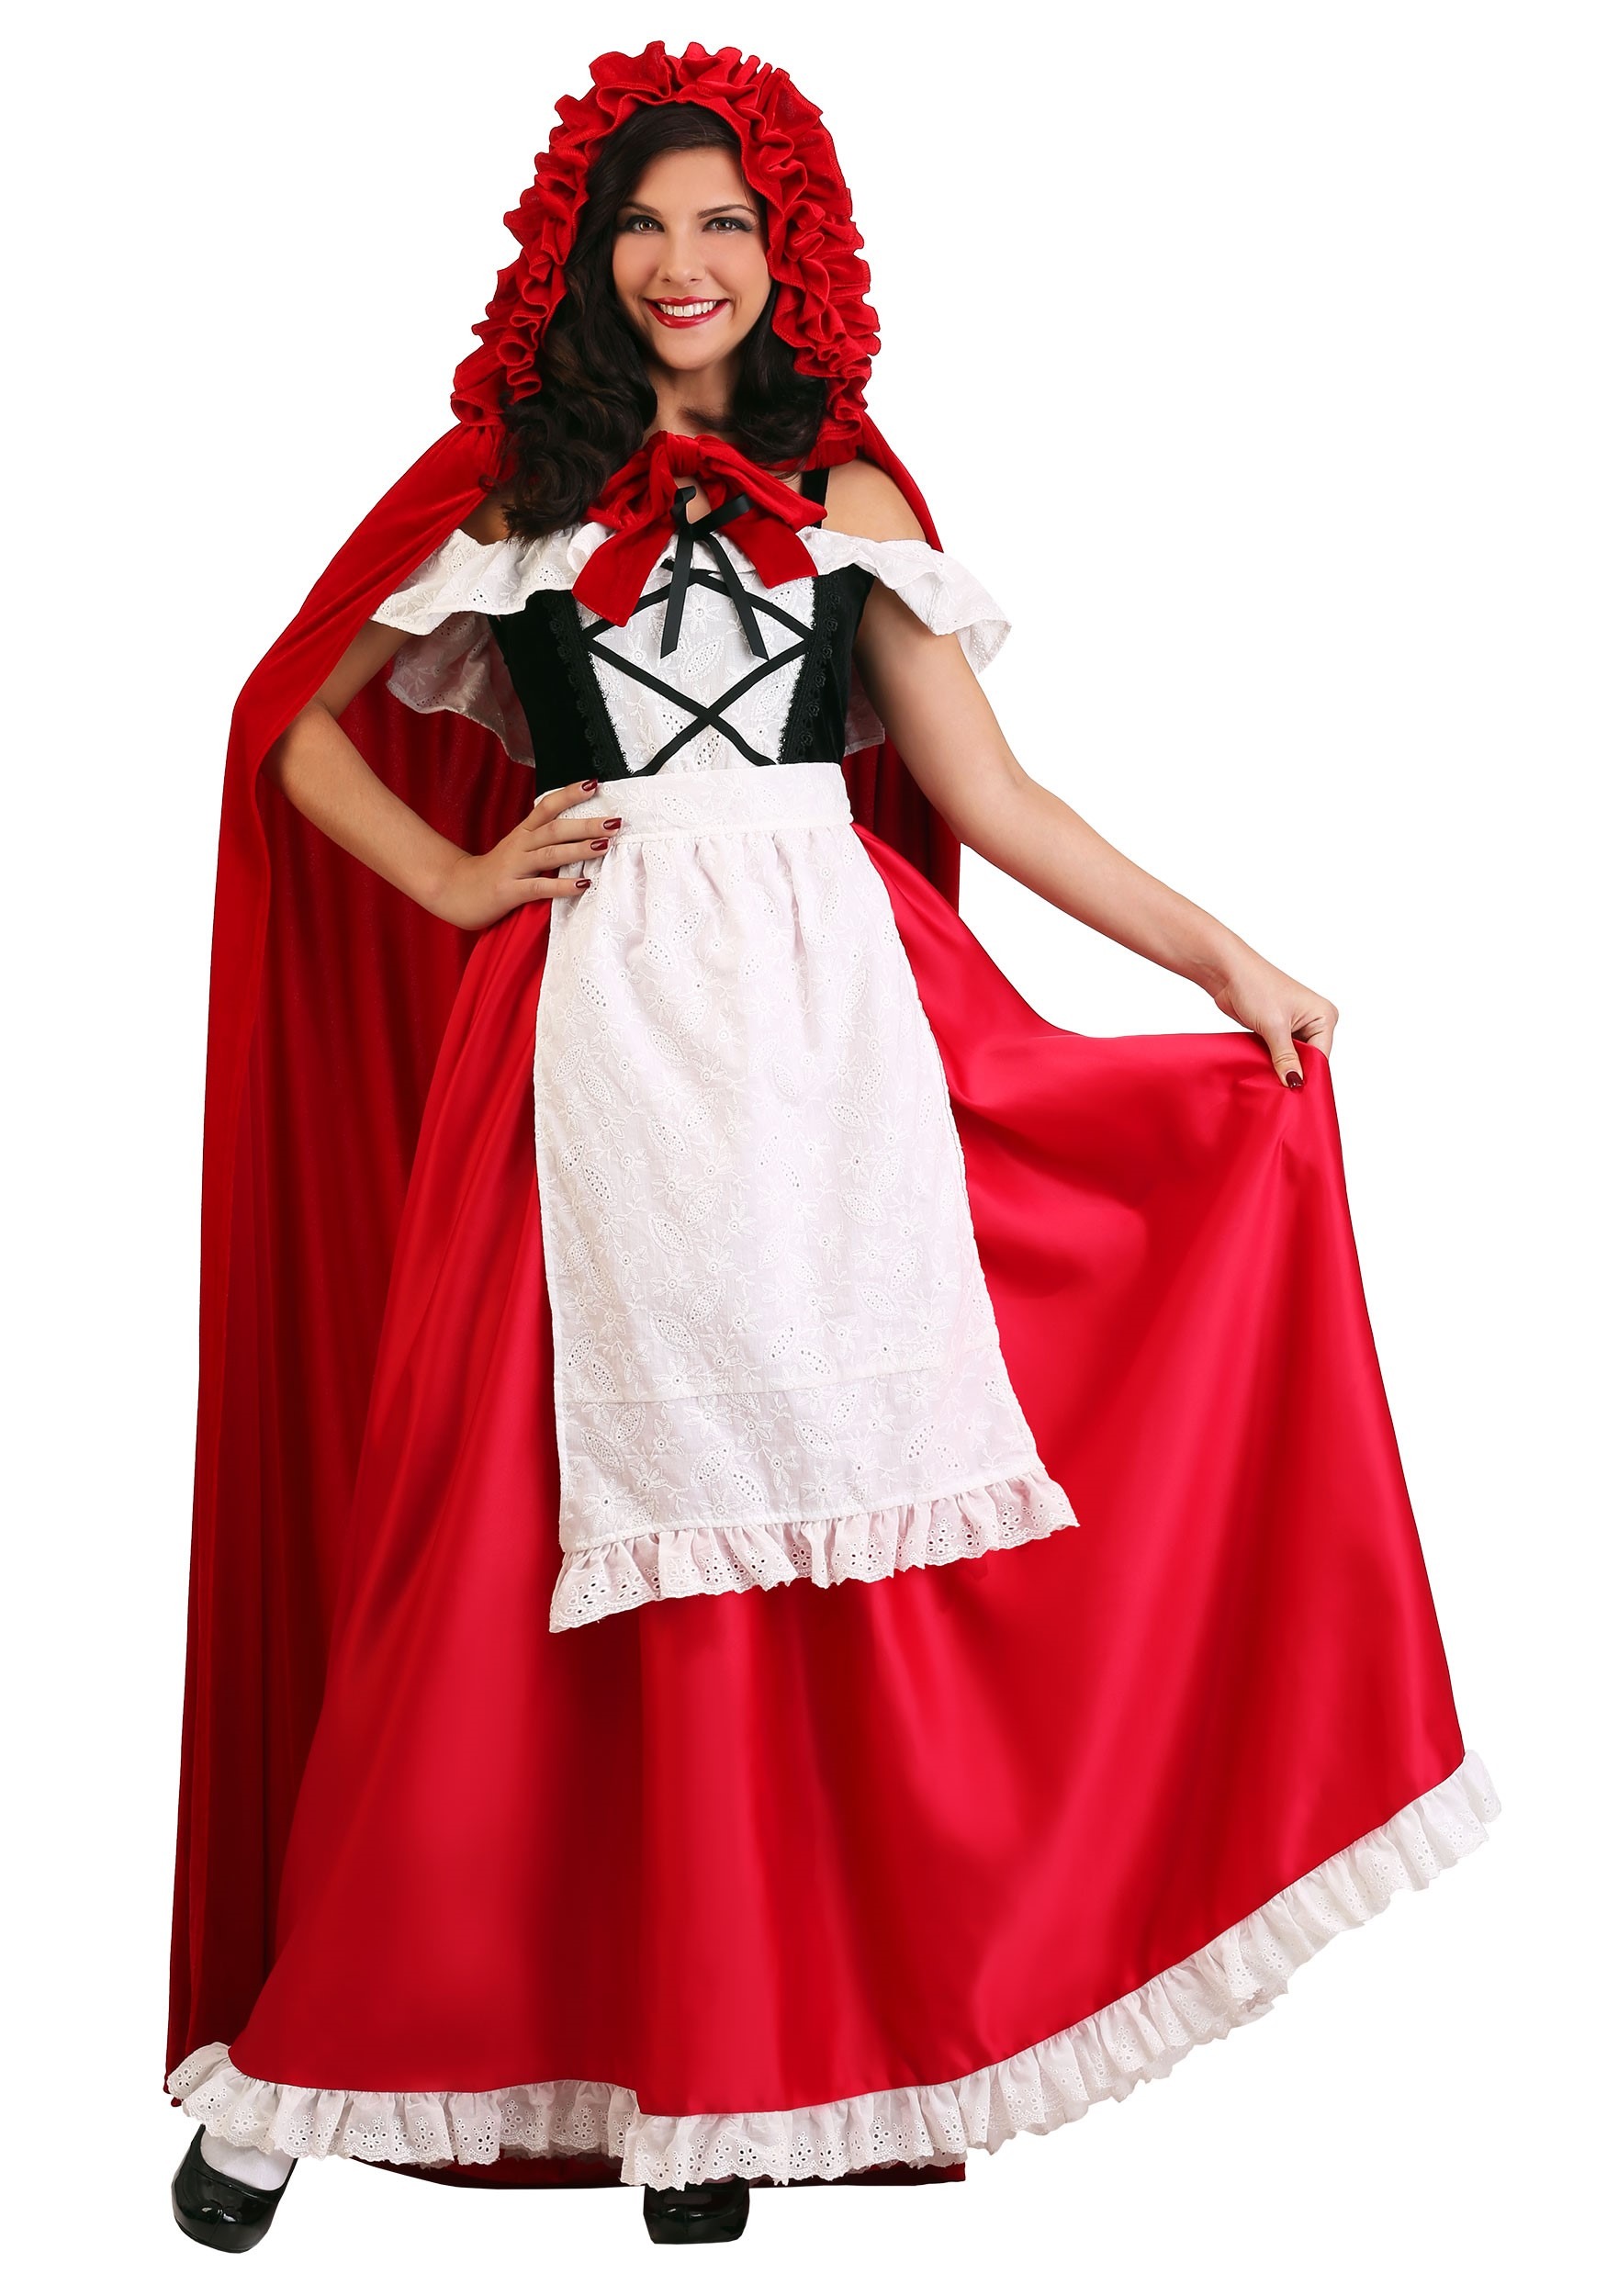 Image of Deluxe Red Riding Hood Women's Costume ID FUN6697AD-M